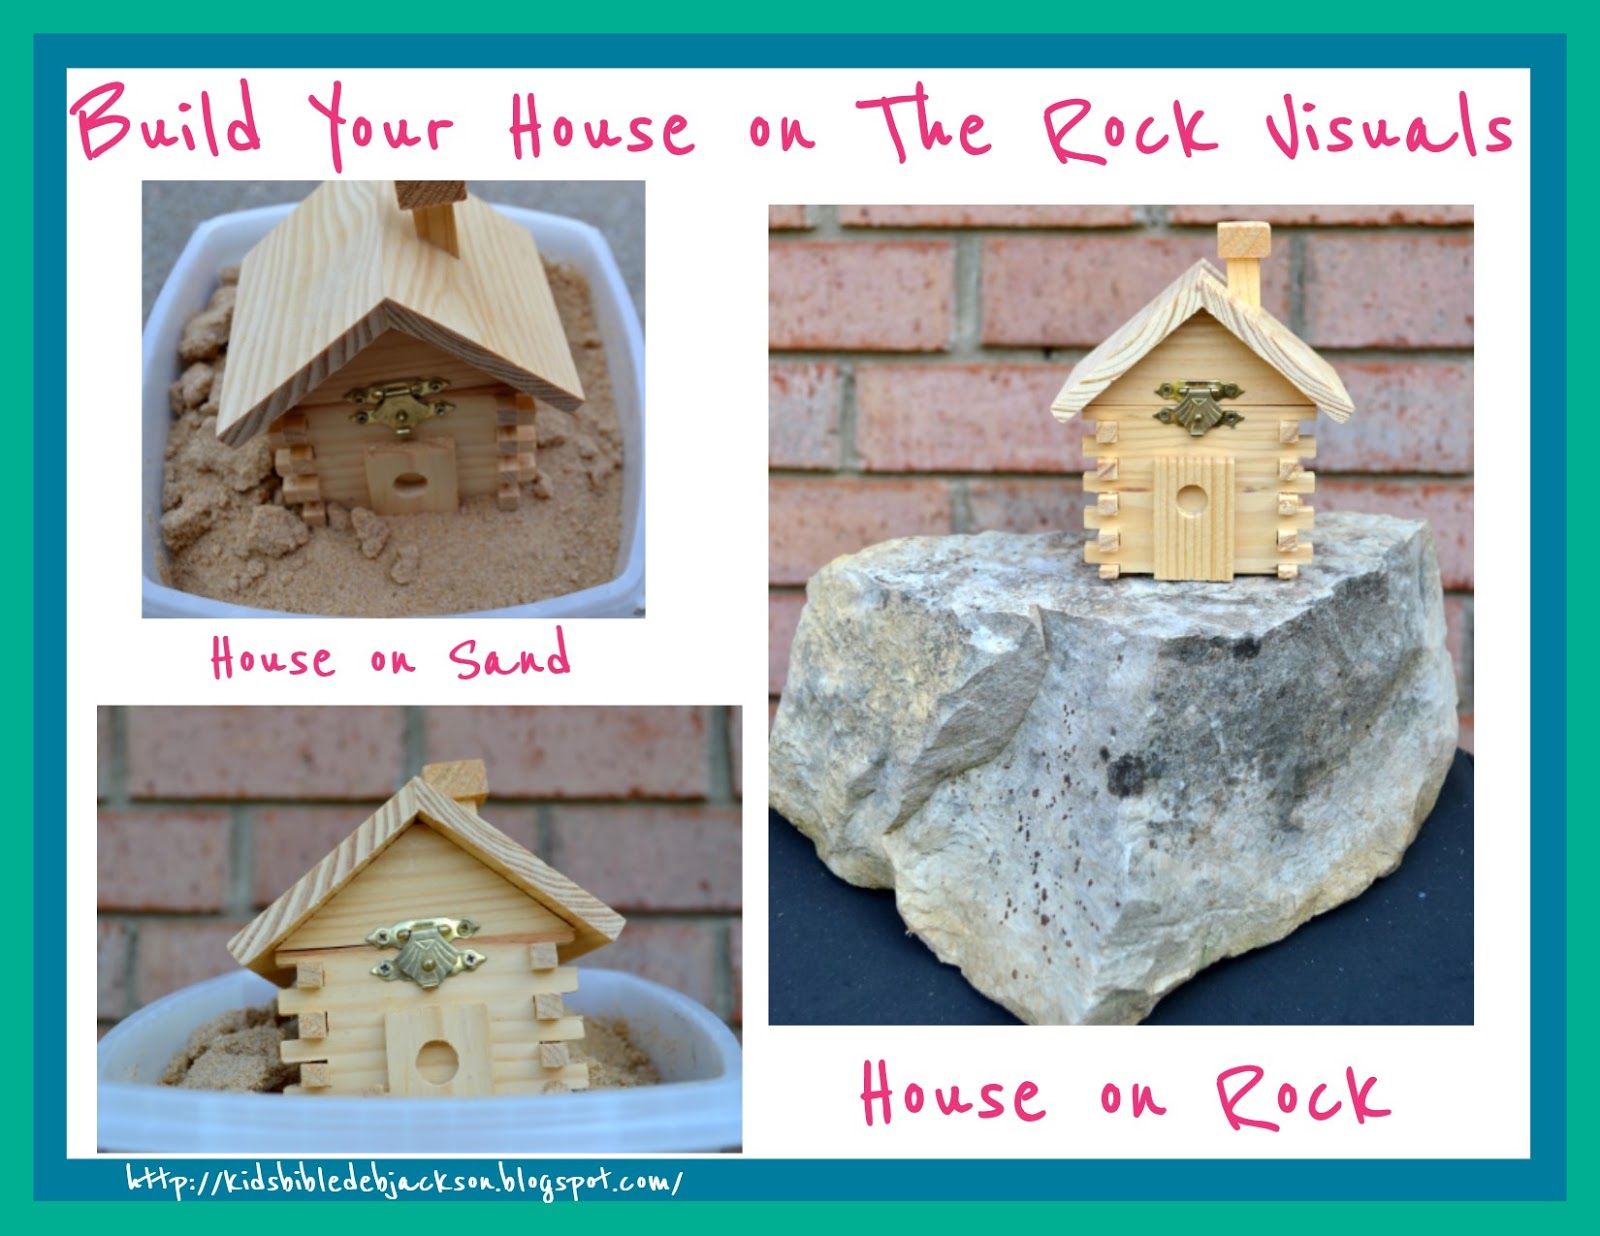 http://kidsbibledebjackson.blogspot.com/2014/09/parable-of-build-your-house-on-rock-be.html